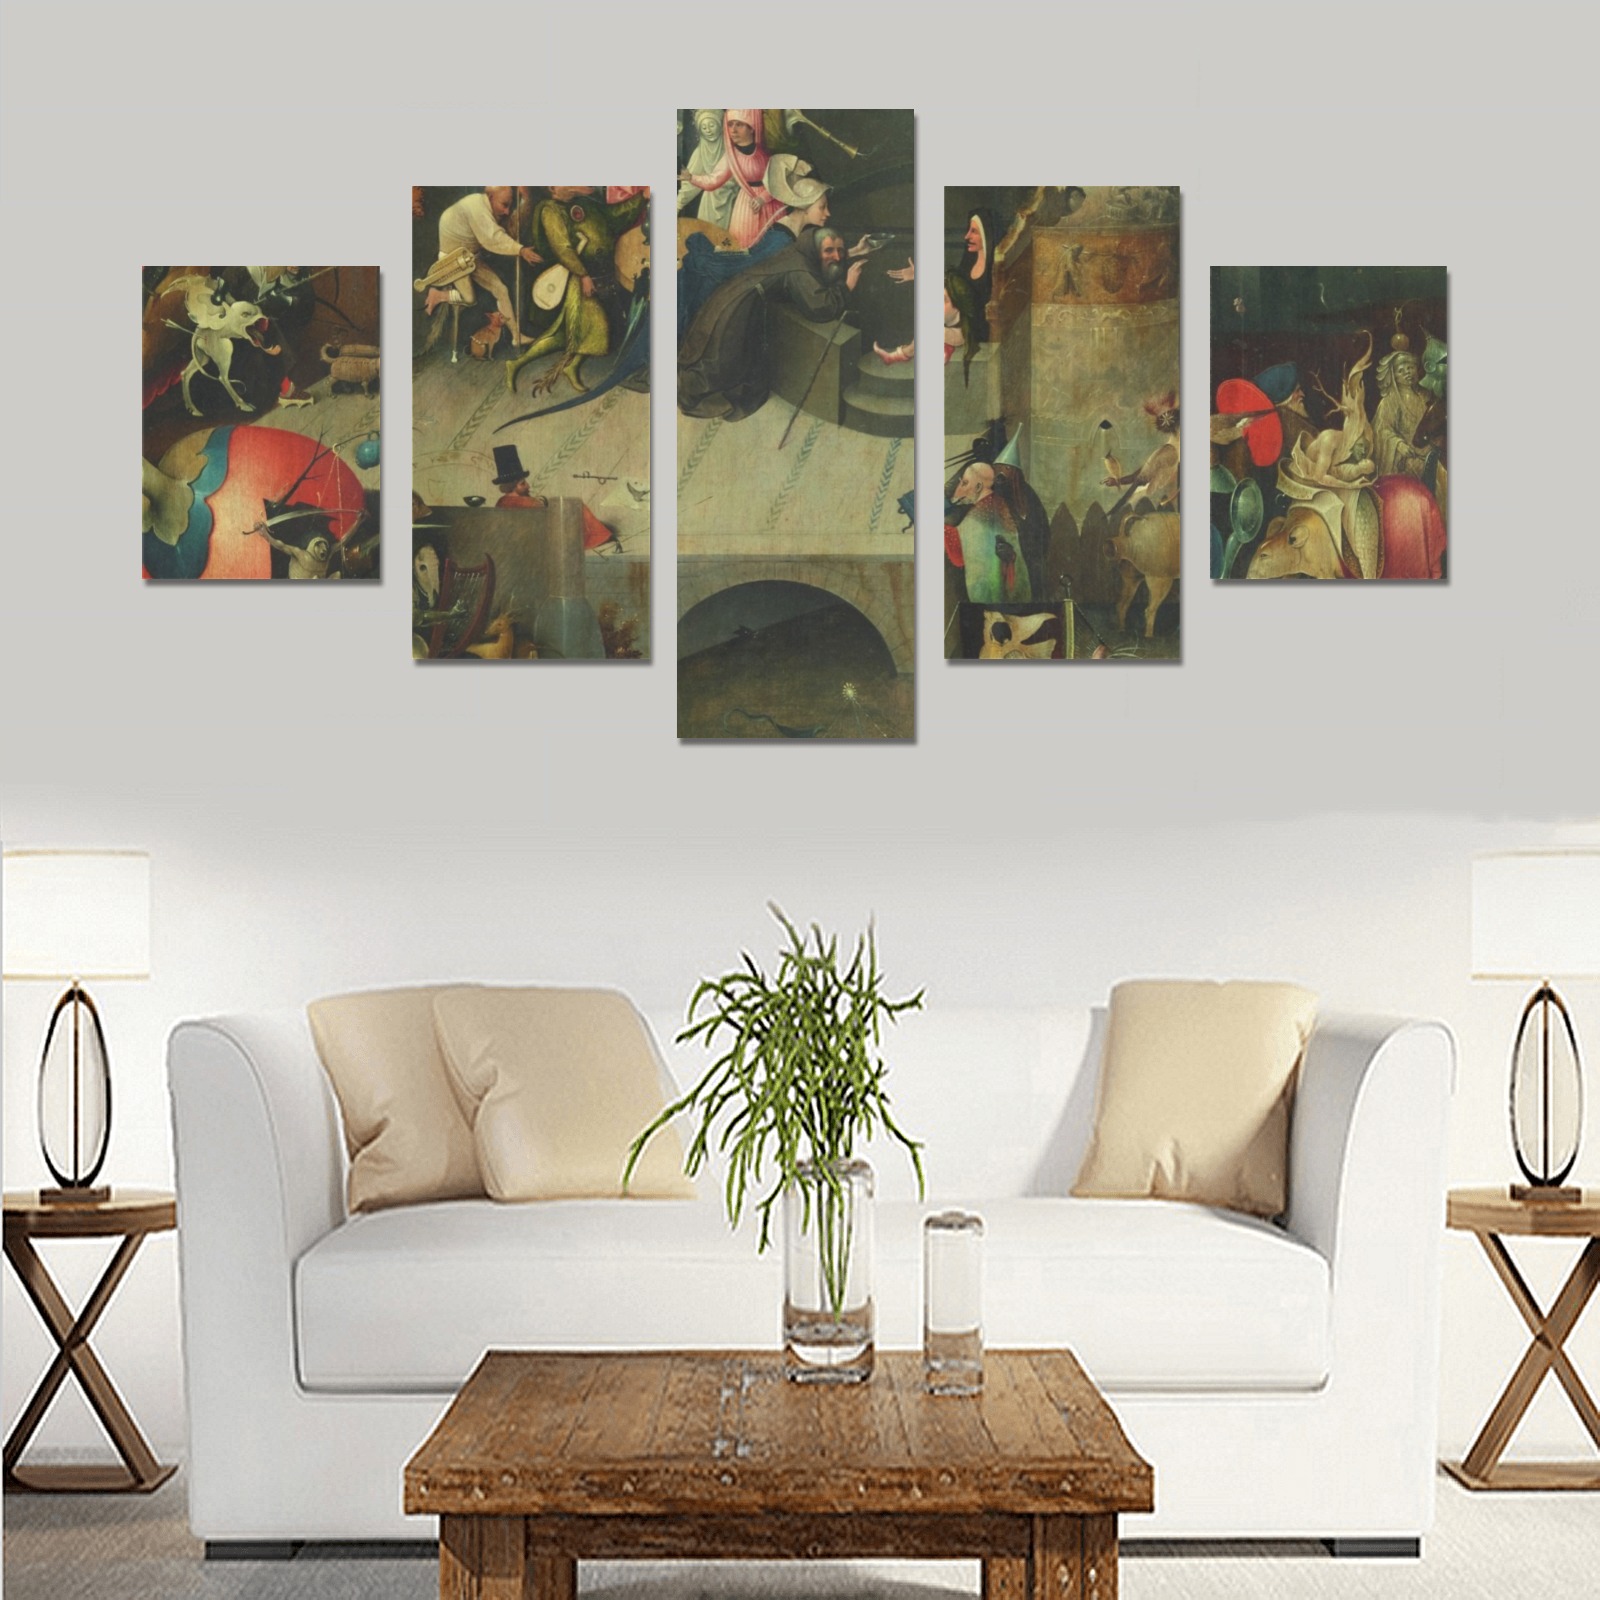 Hieronymus Bosch-The Temptation of St Anthony Canvas Print Sets B (No Frame)